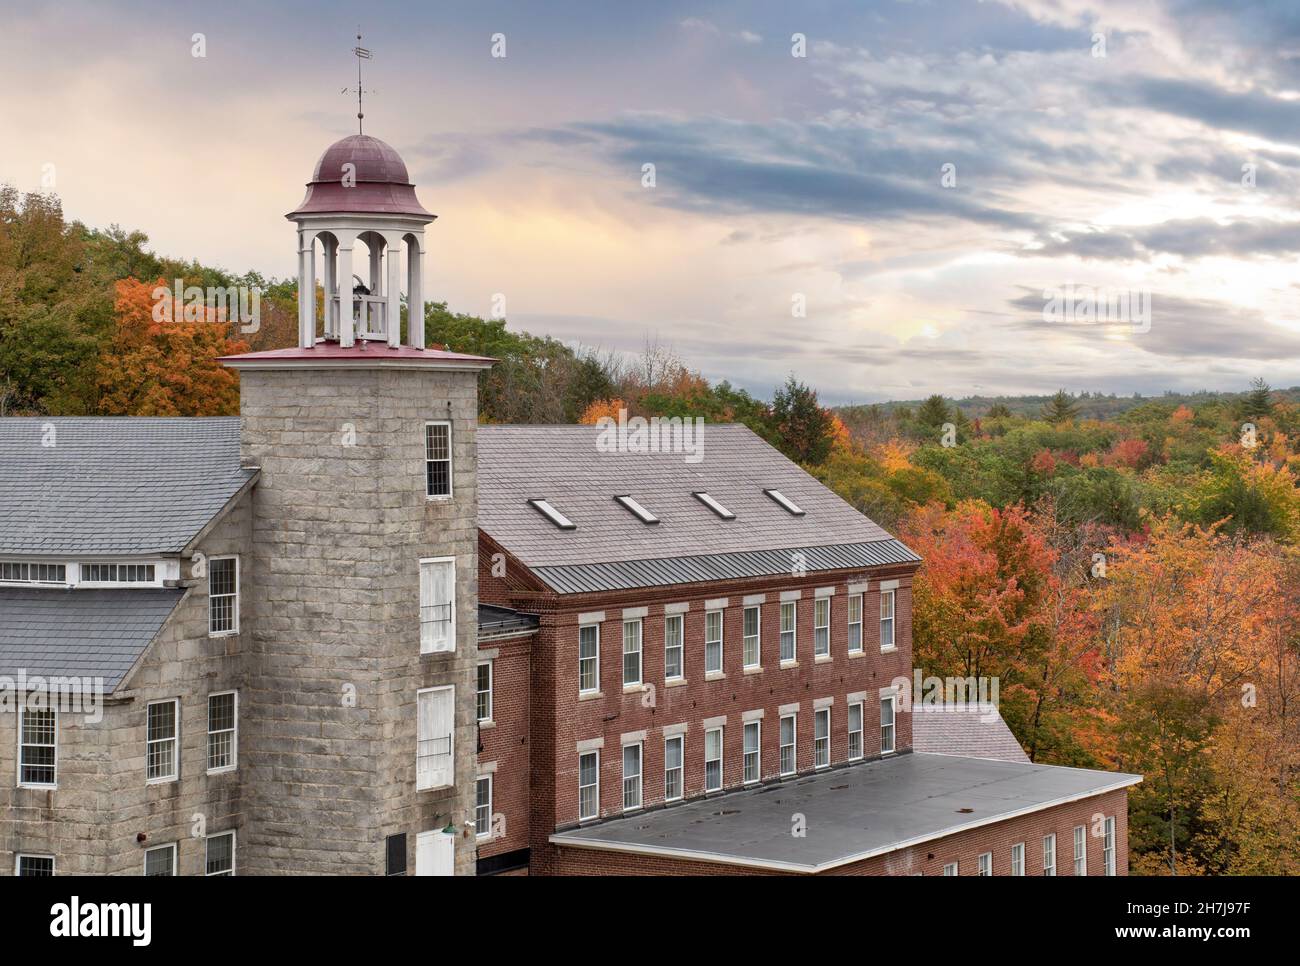 Beautiful sky and colorful autumn scene in historic town of Harrisville, New Hampshire. Old bell tower and preserved textile mill buildings. Stock Photo